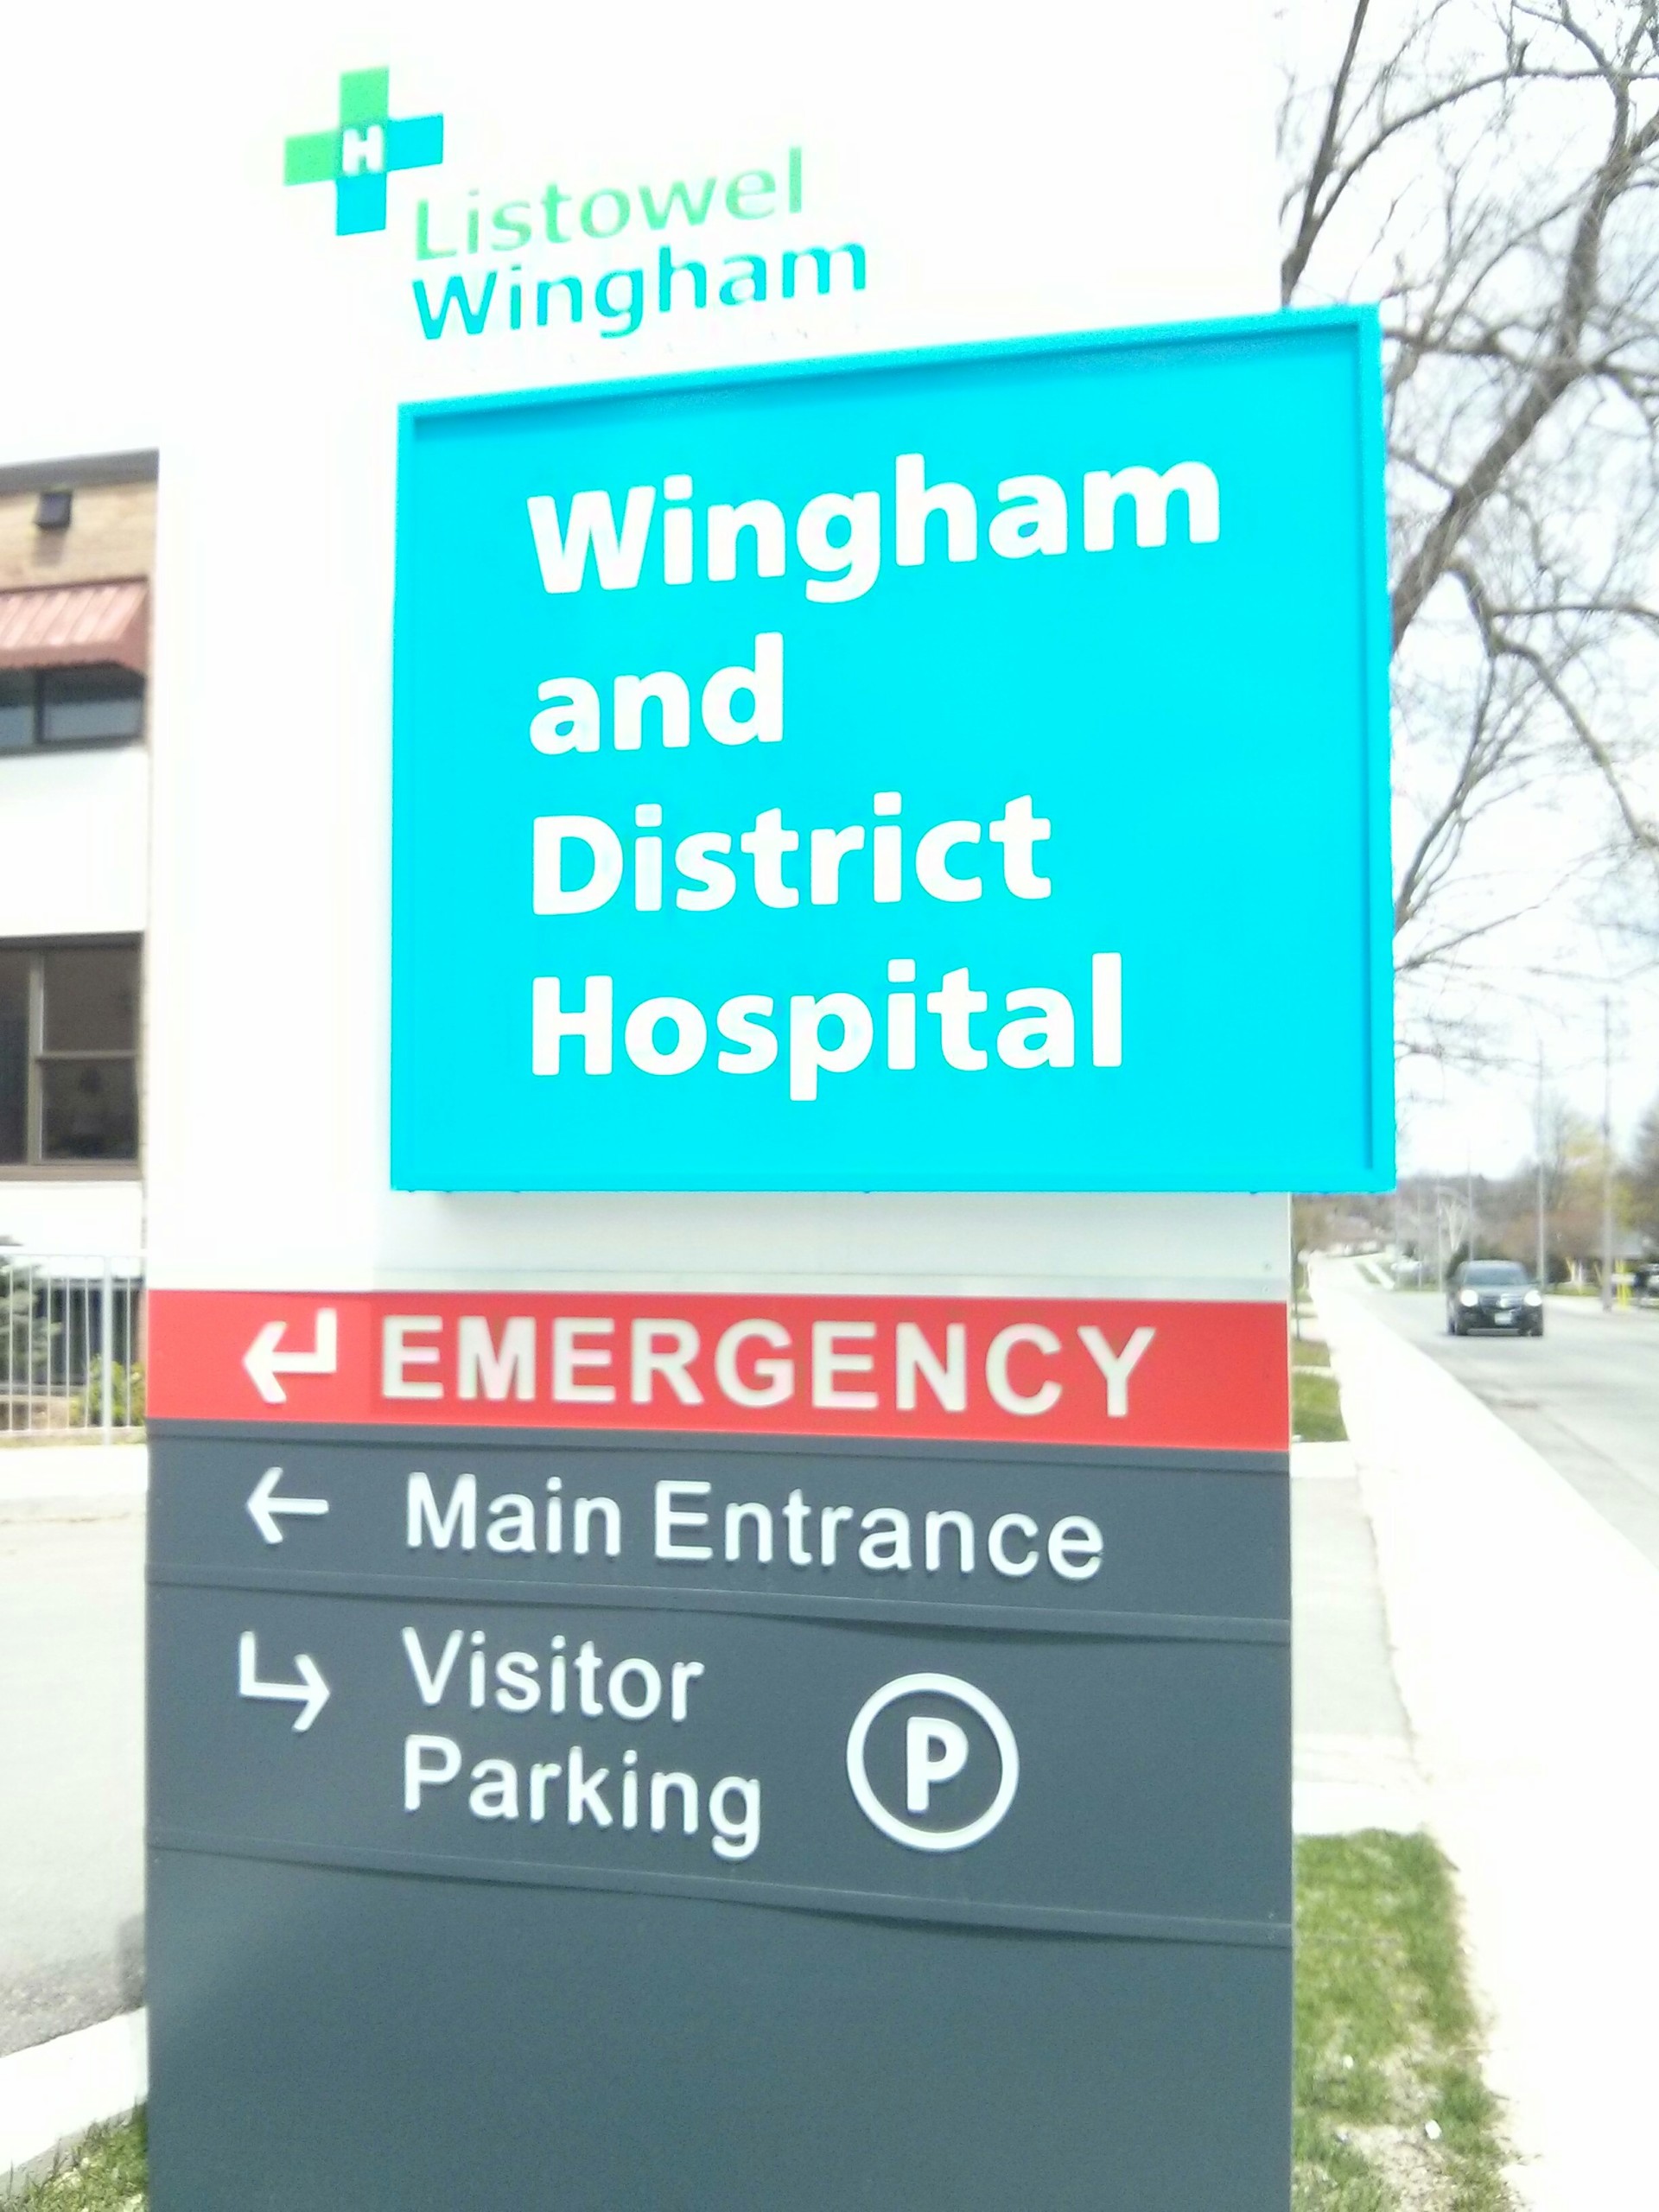 Wingham ER closure extended to 9 a.m. Sunday